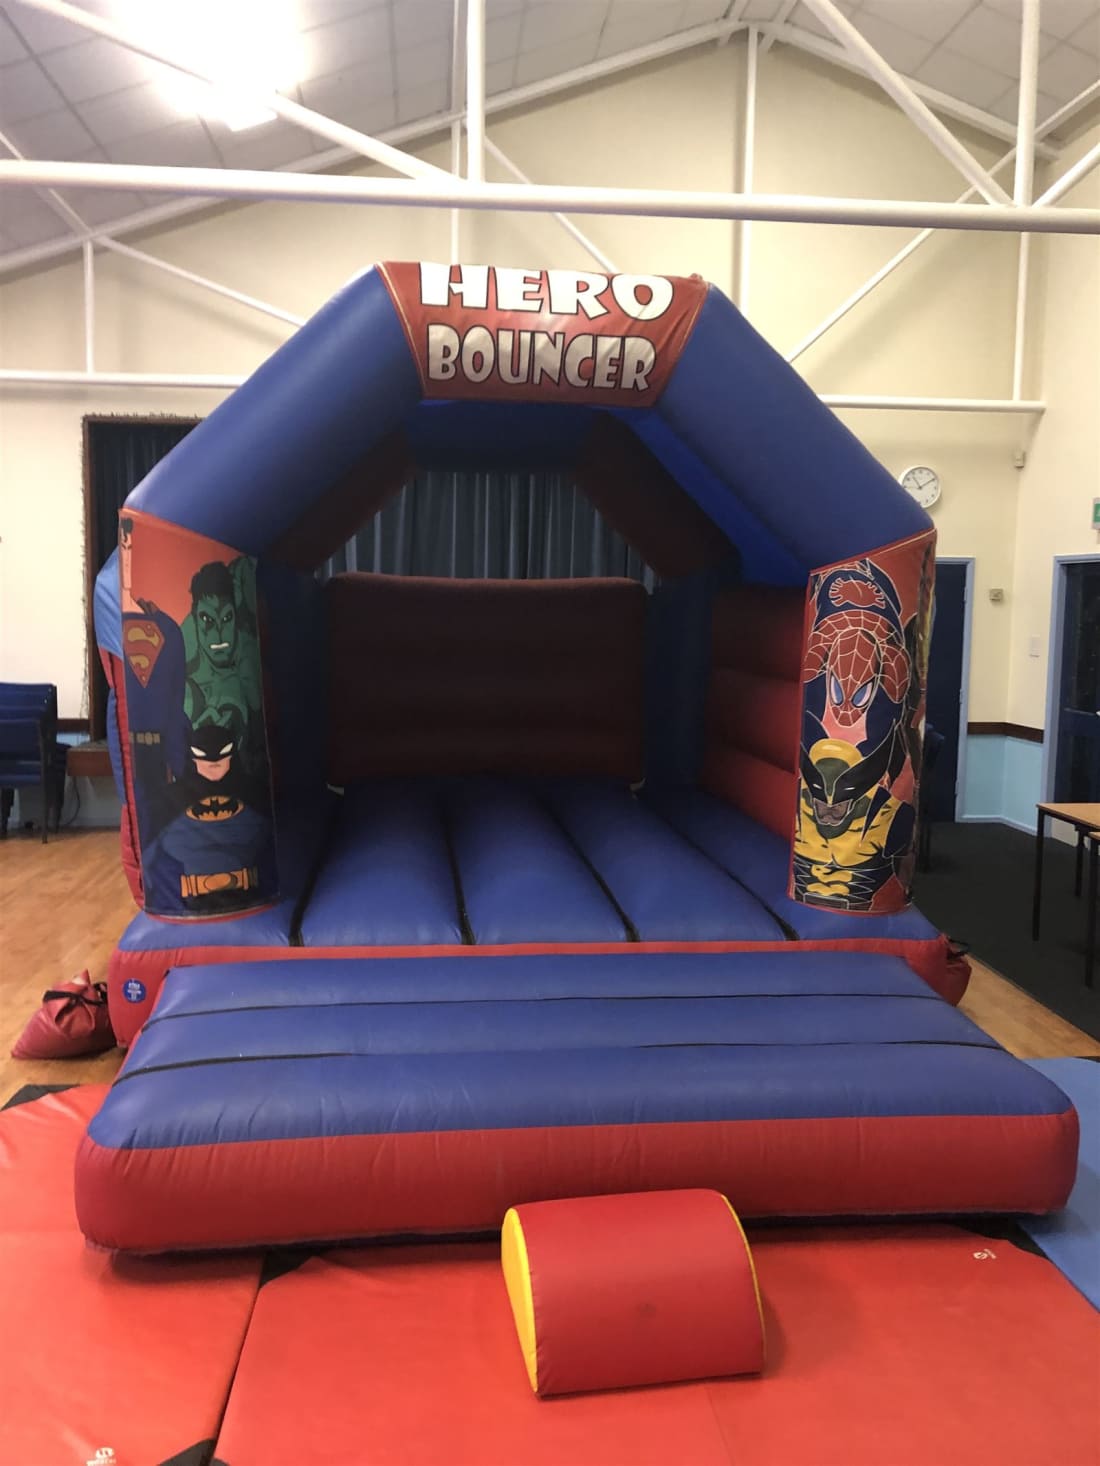 Boo's Inflatable Games in Stourbridge: Fun-Filled Bouncy Castles